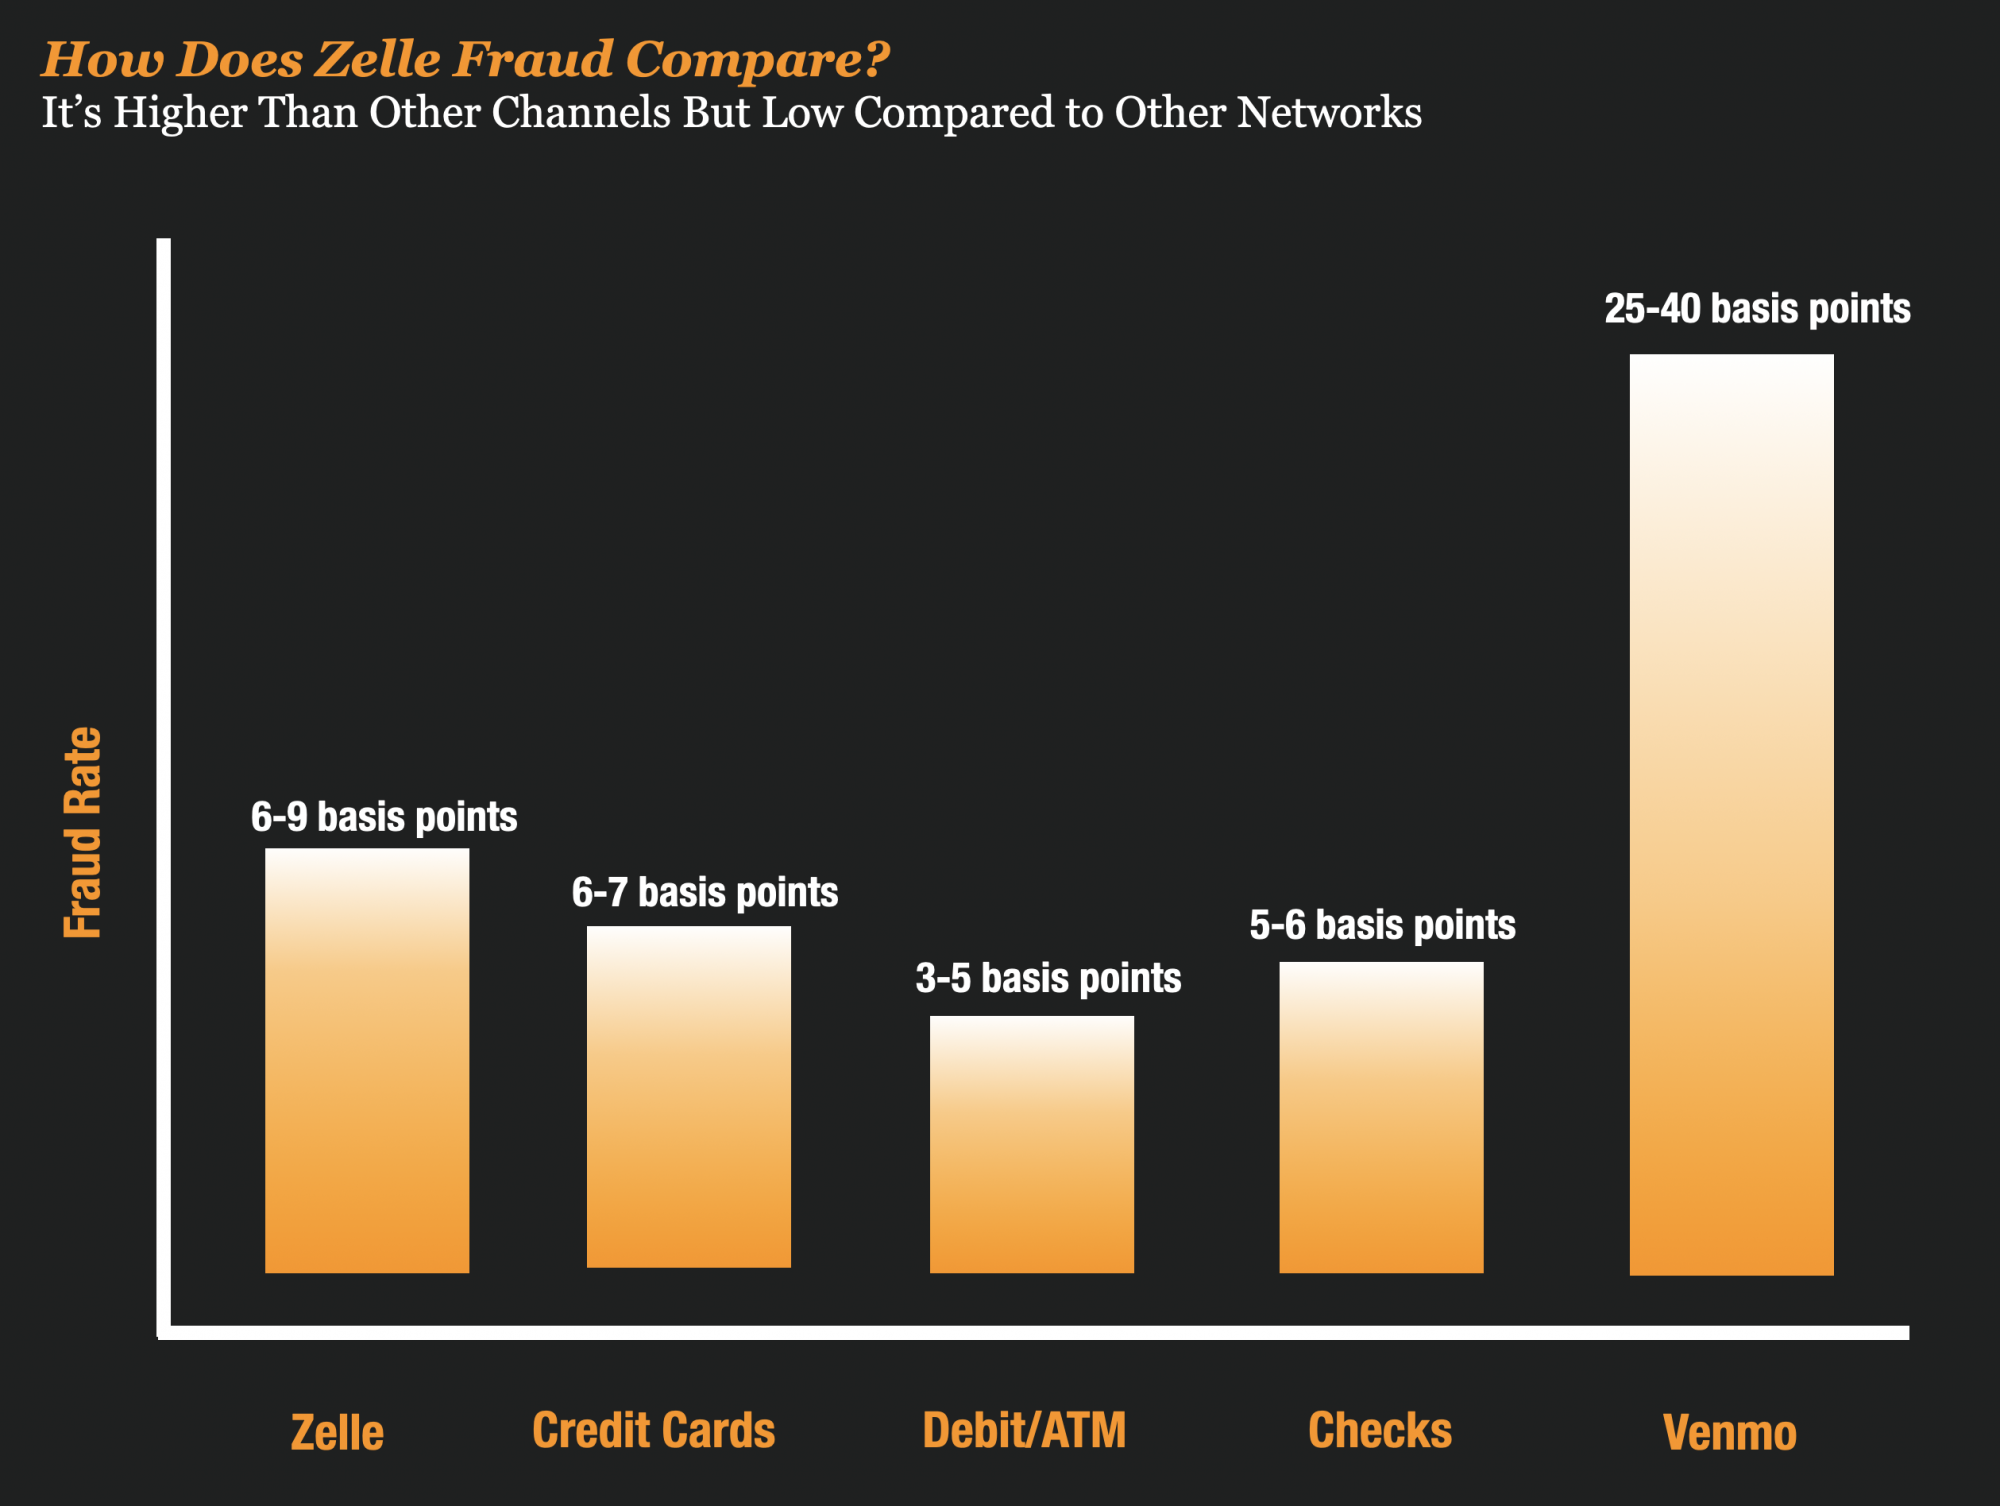 Bank CEO's Say Zelle Fraud Is Low – Is That Really True? – Frank on Fraud